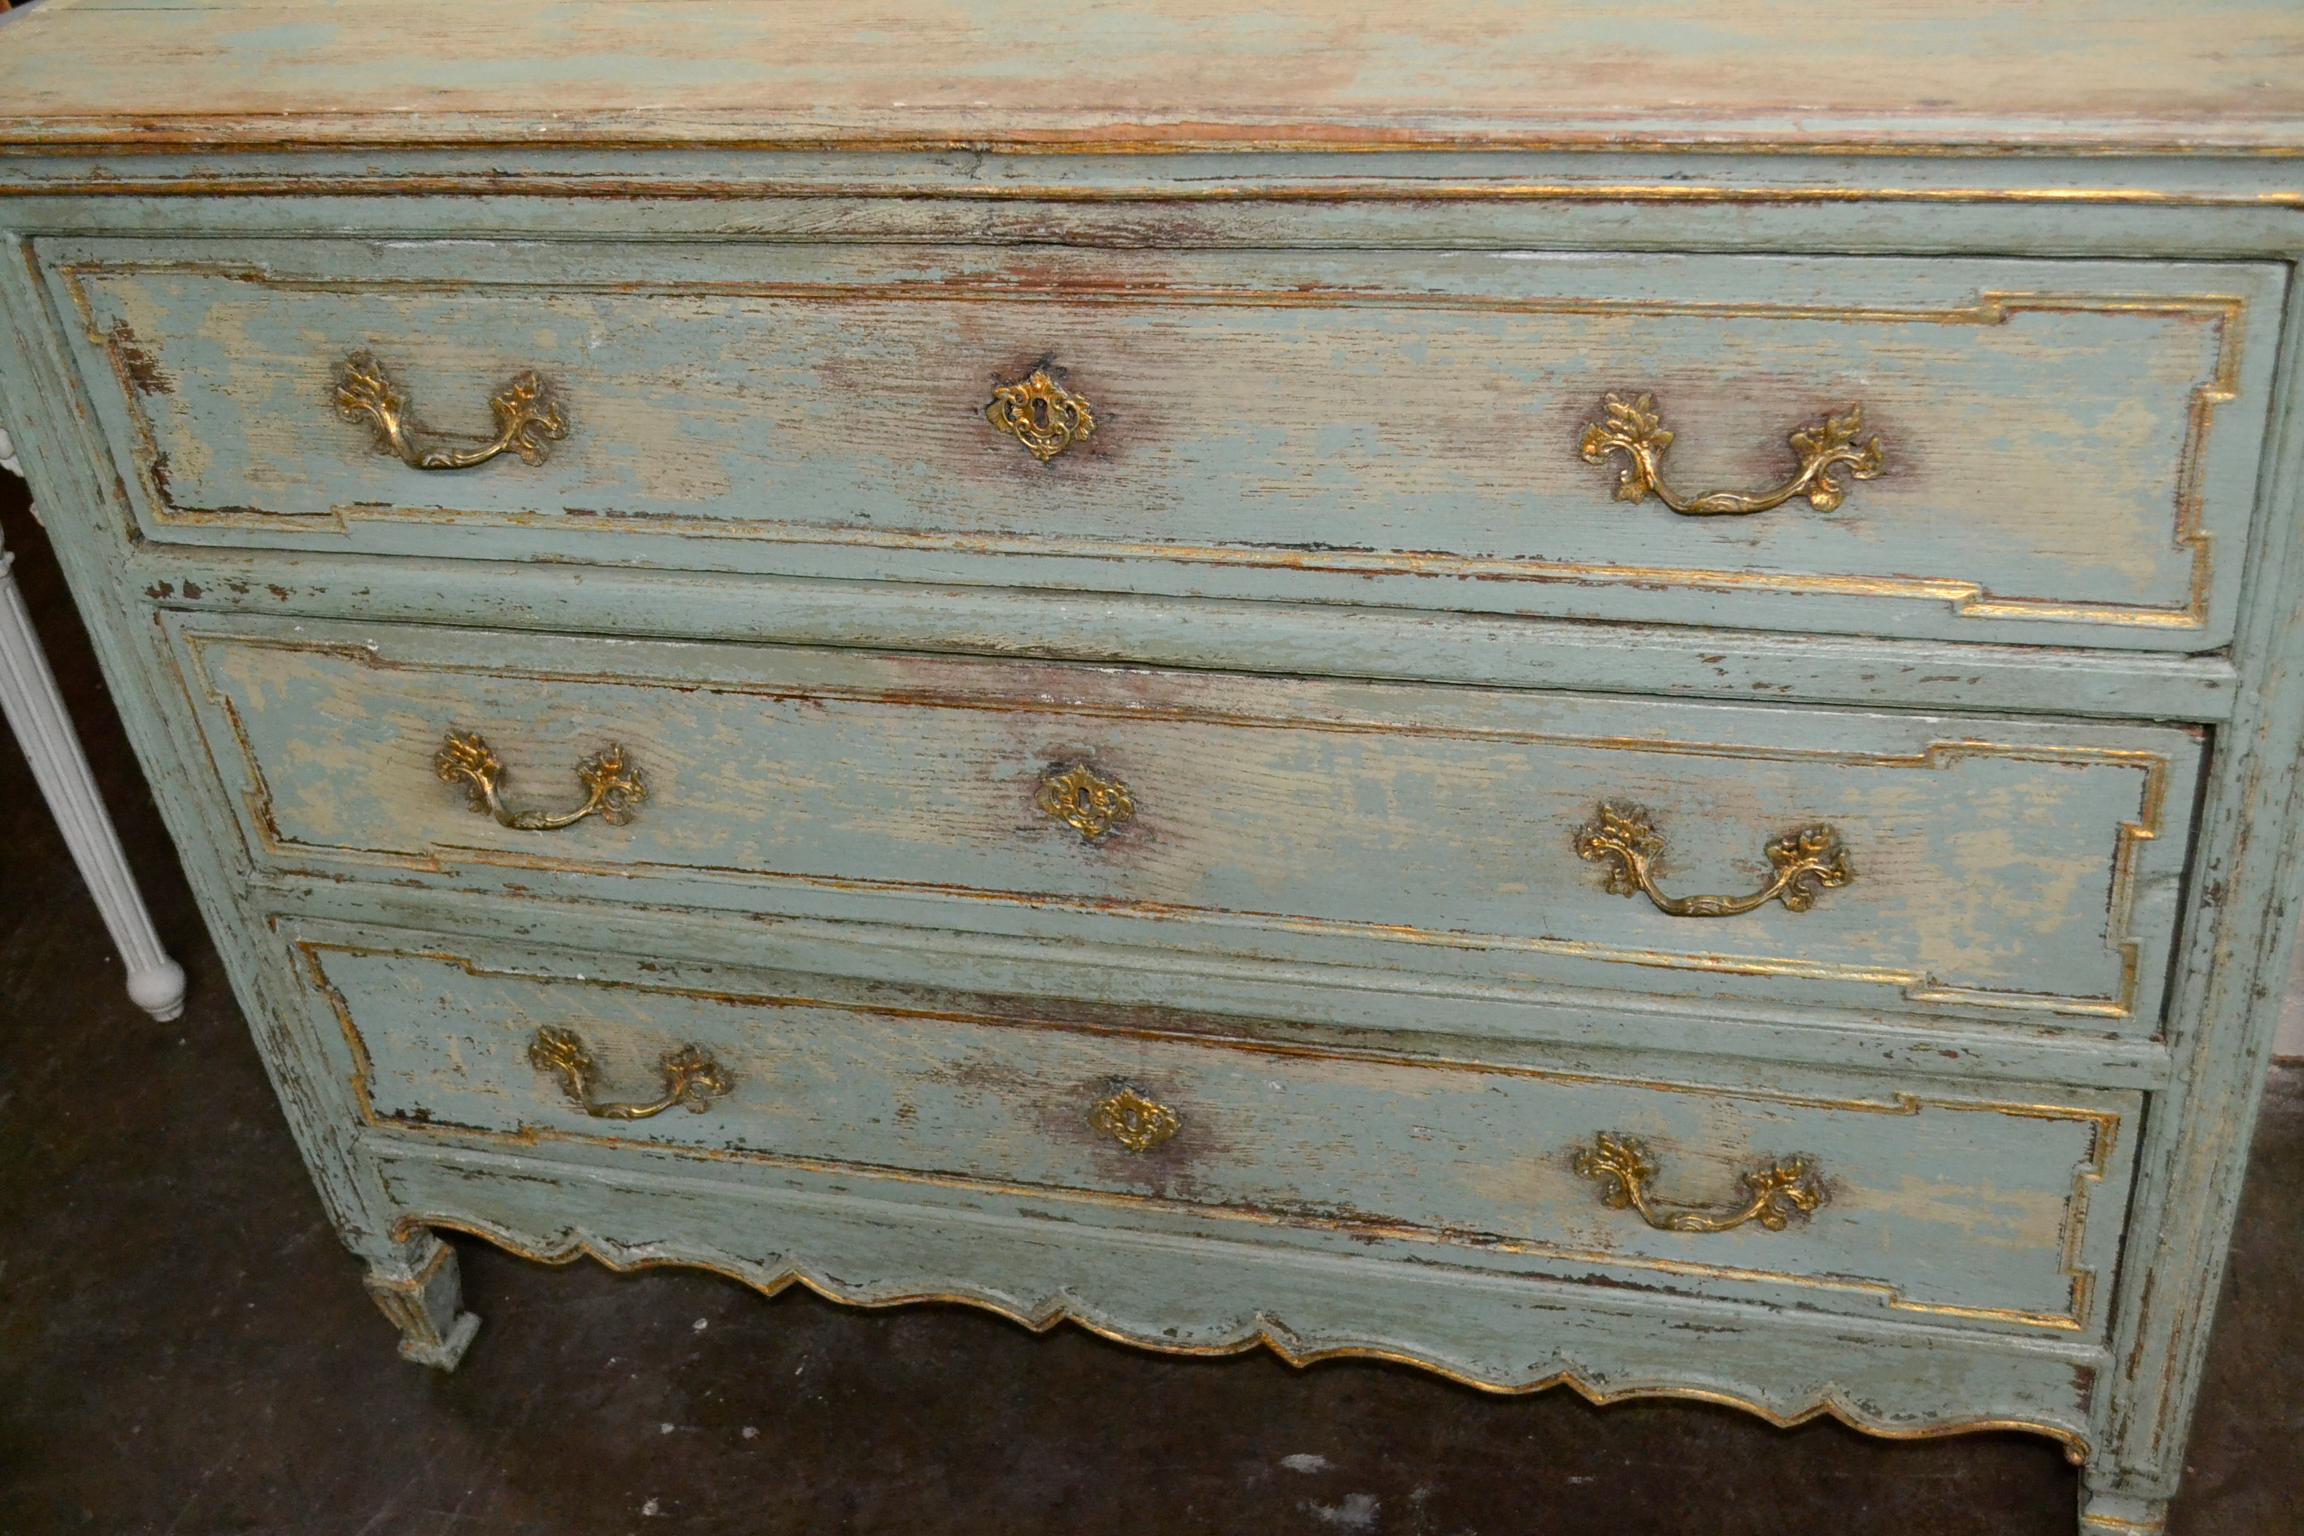 Wonderful 18th century French Louis XV carved and painted commode.